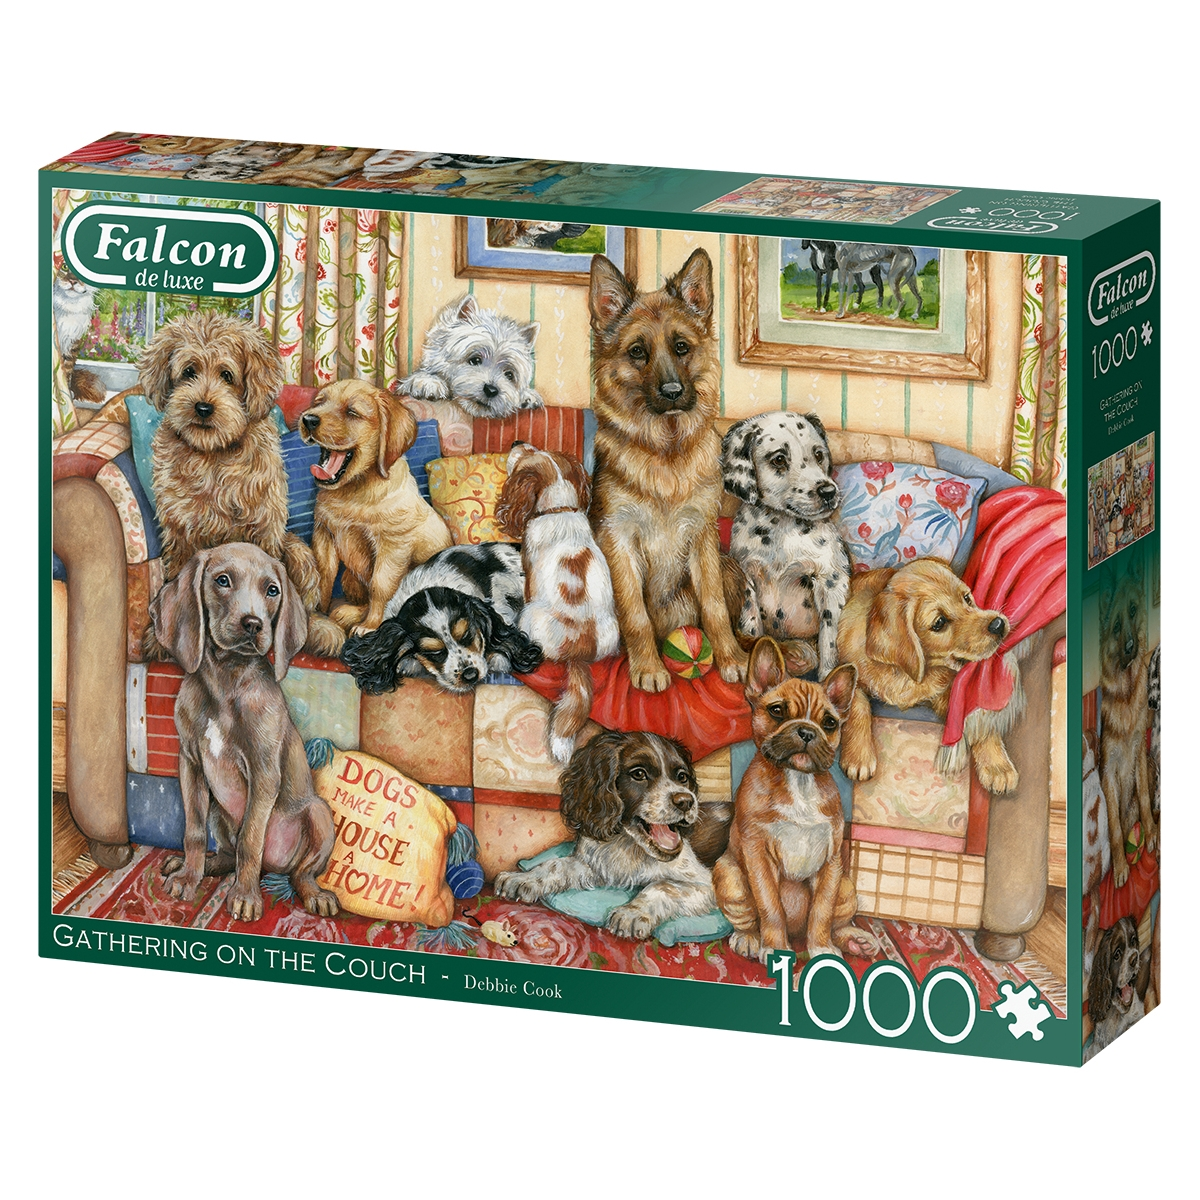 FALCON Jumbo 11293 Gathering Dog Zubehör, Couch-1000 Mehrfarben on The Teile Puzzle